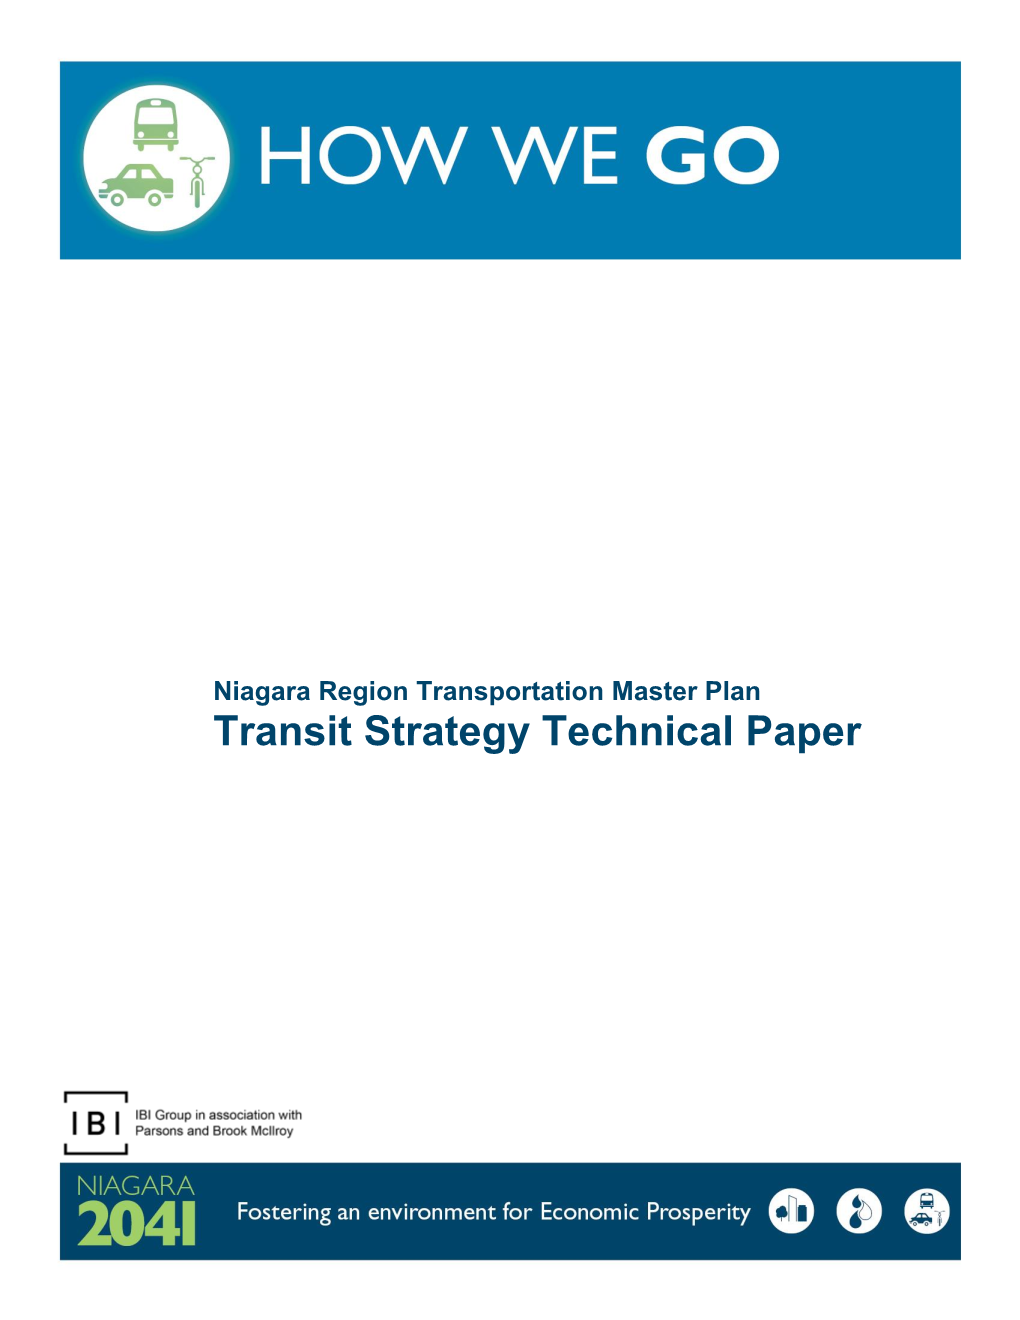 Transit Strategy Technical Paper